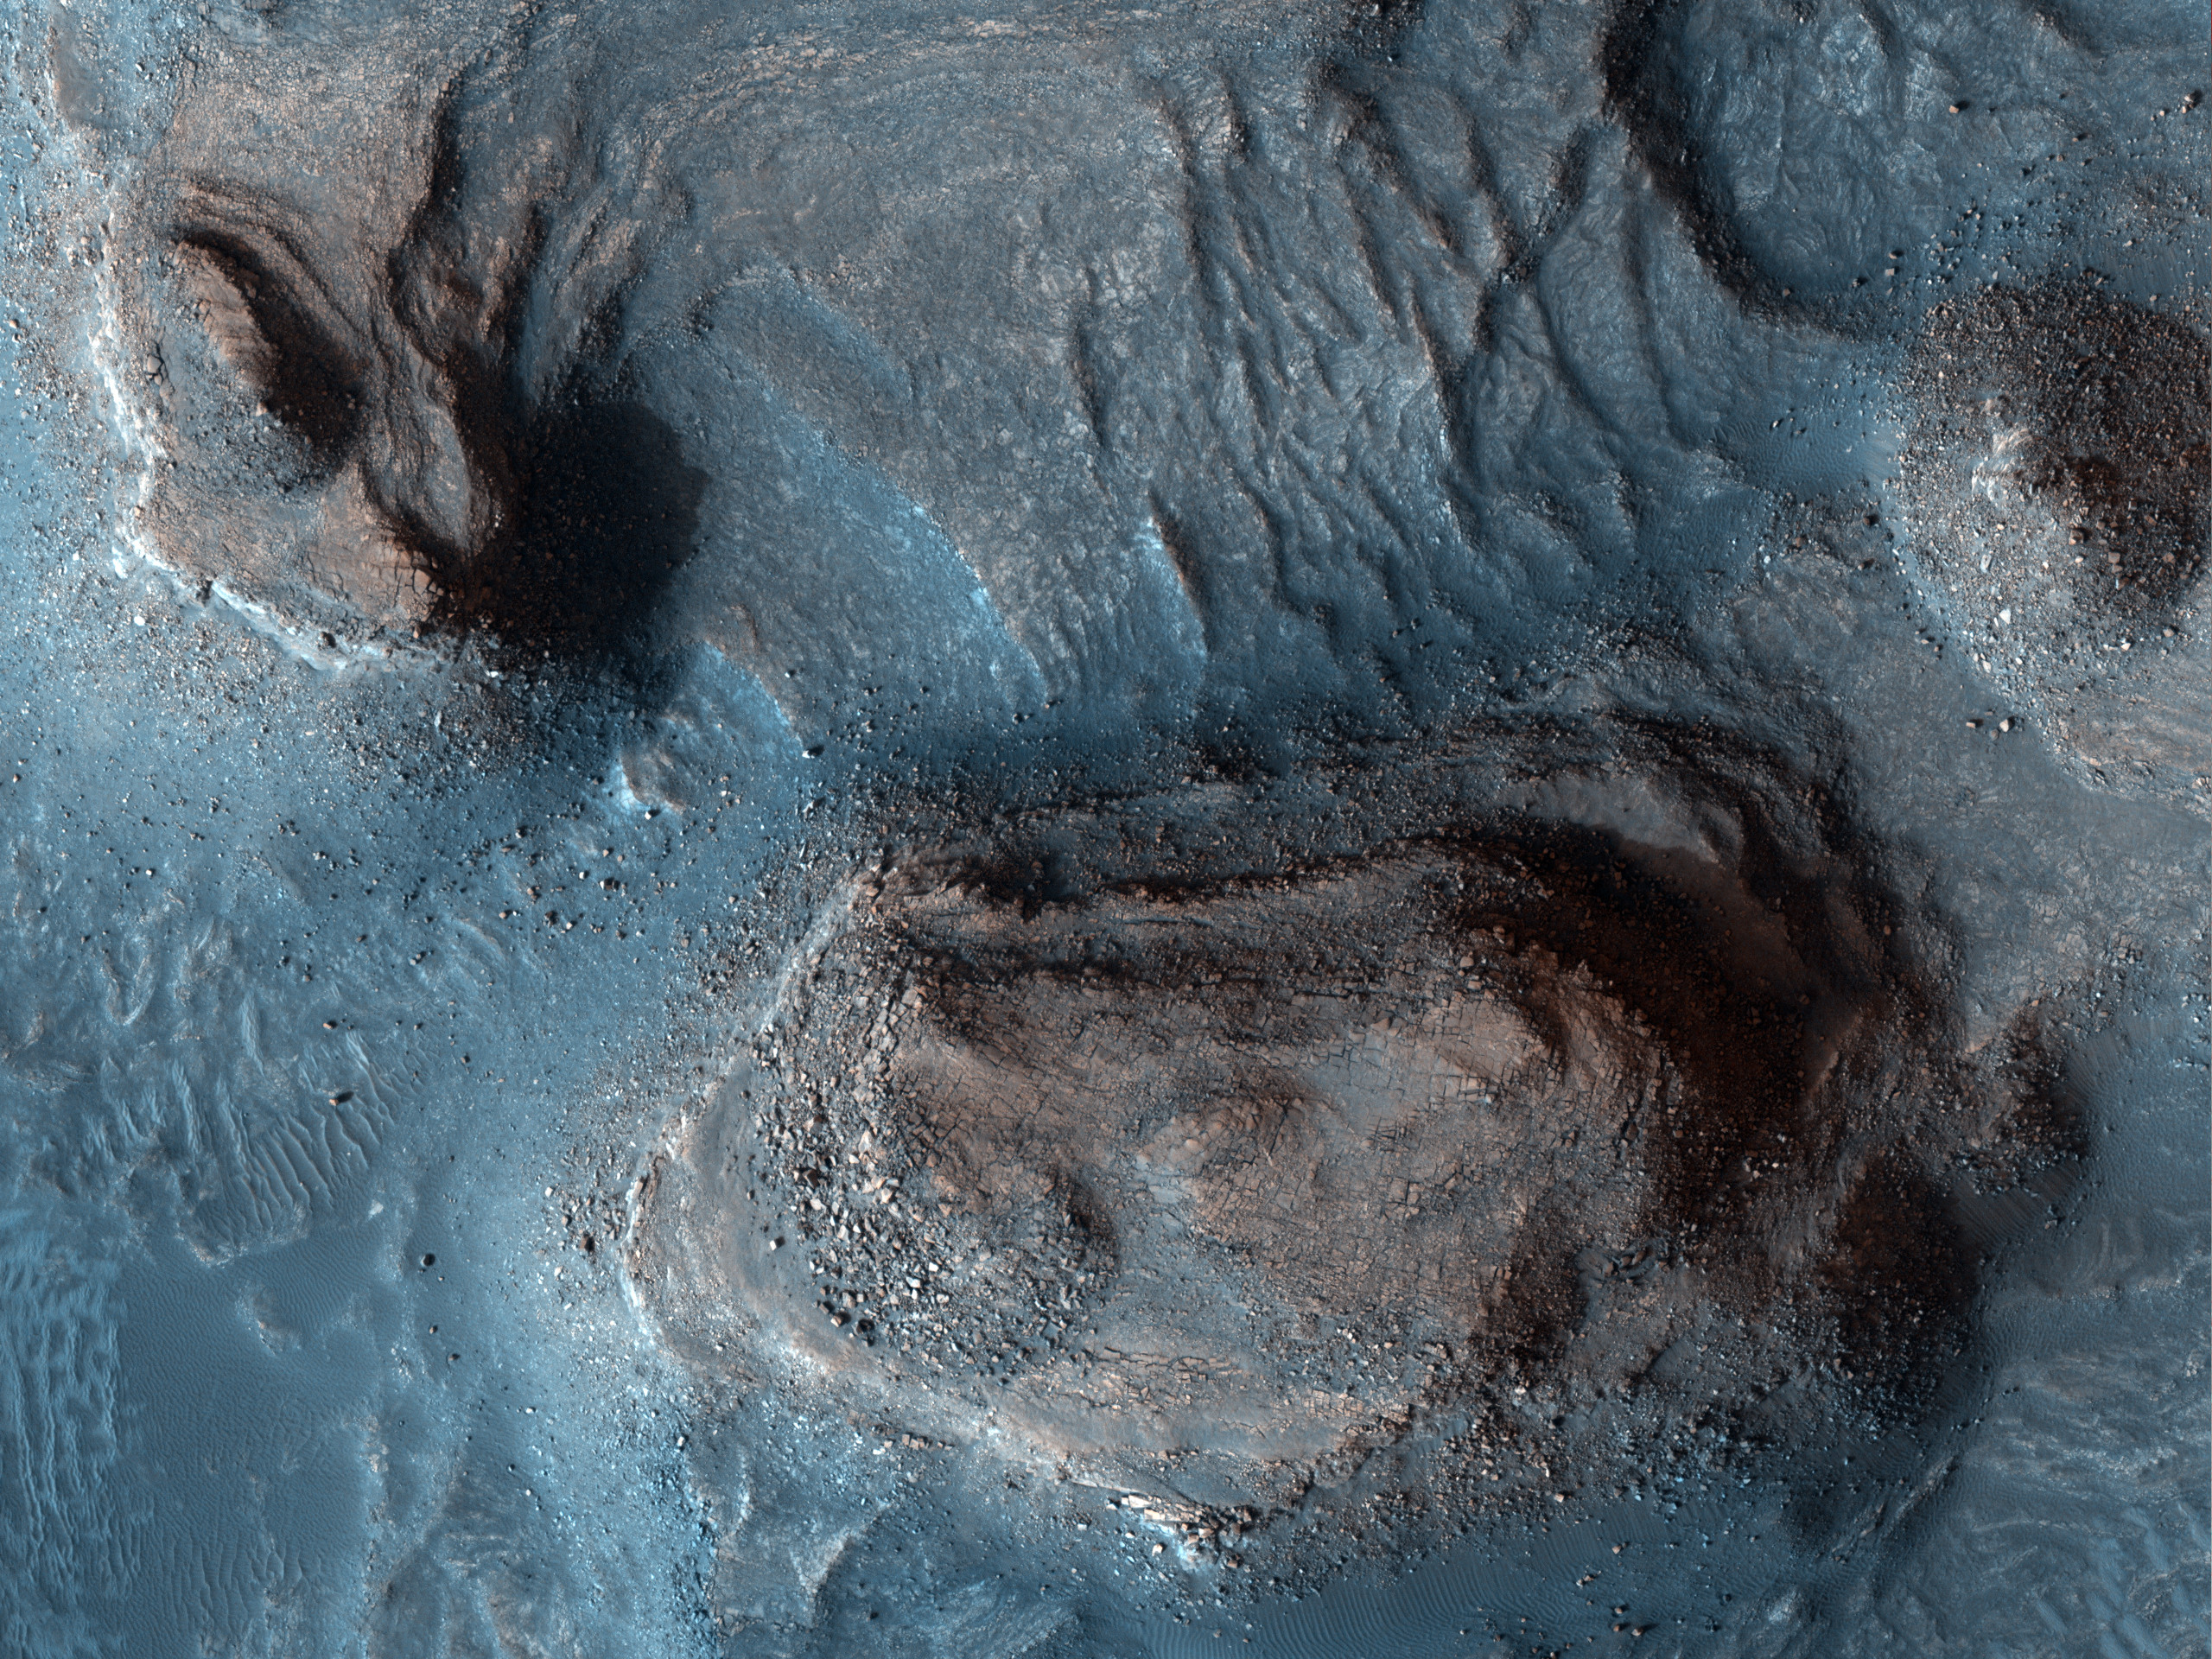 Rocky mesas of Mars captured by HiRISE camera